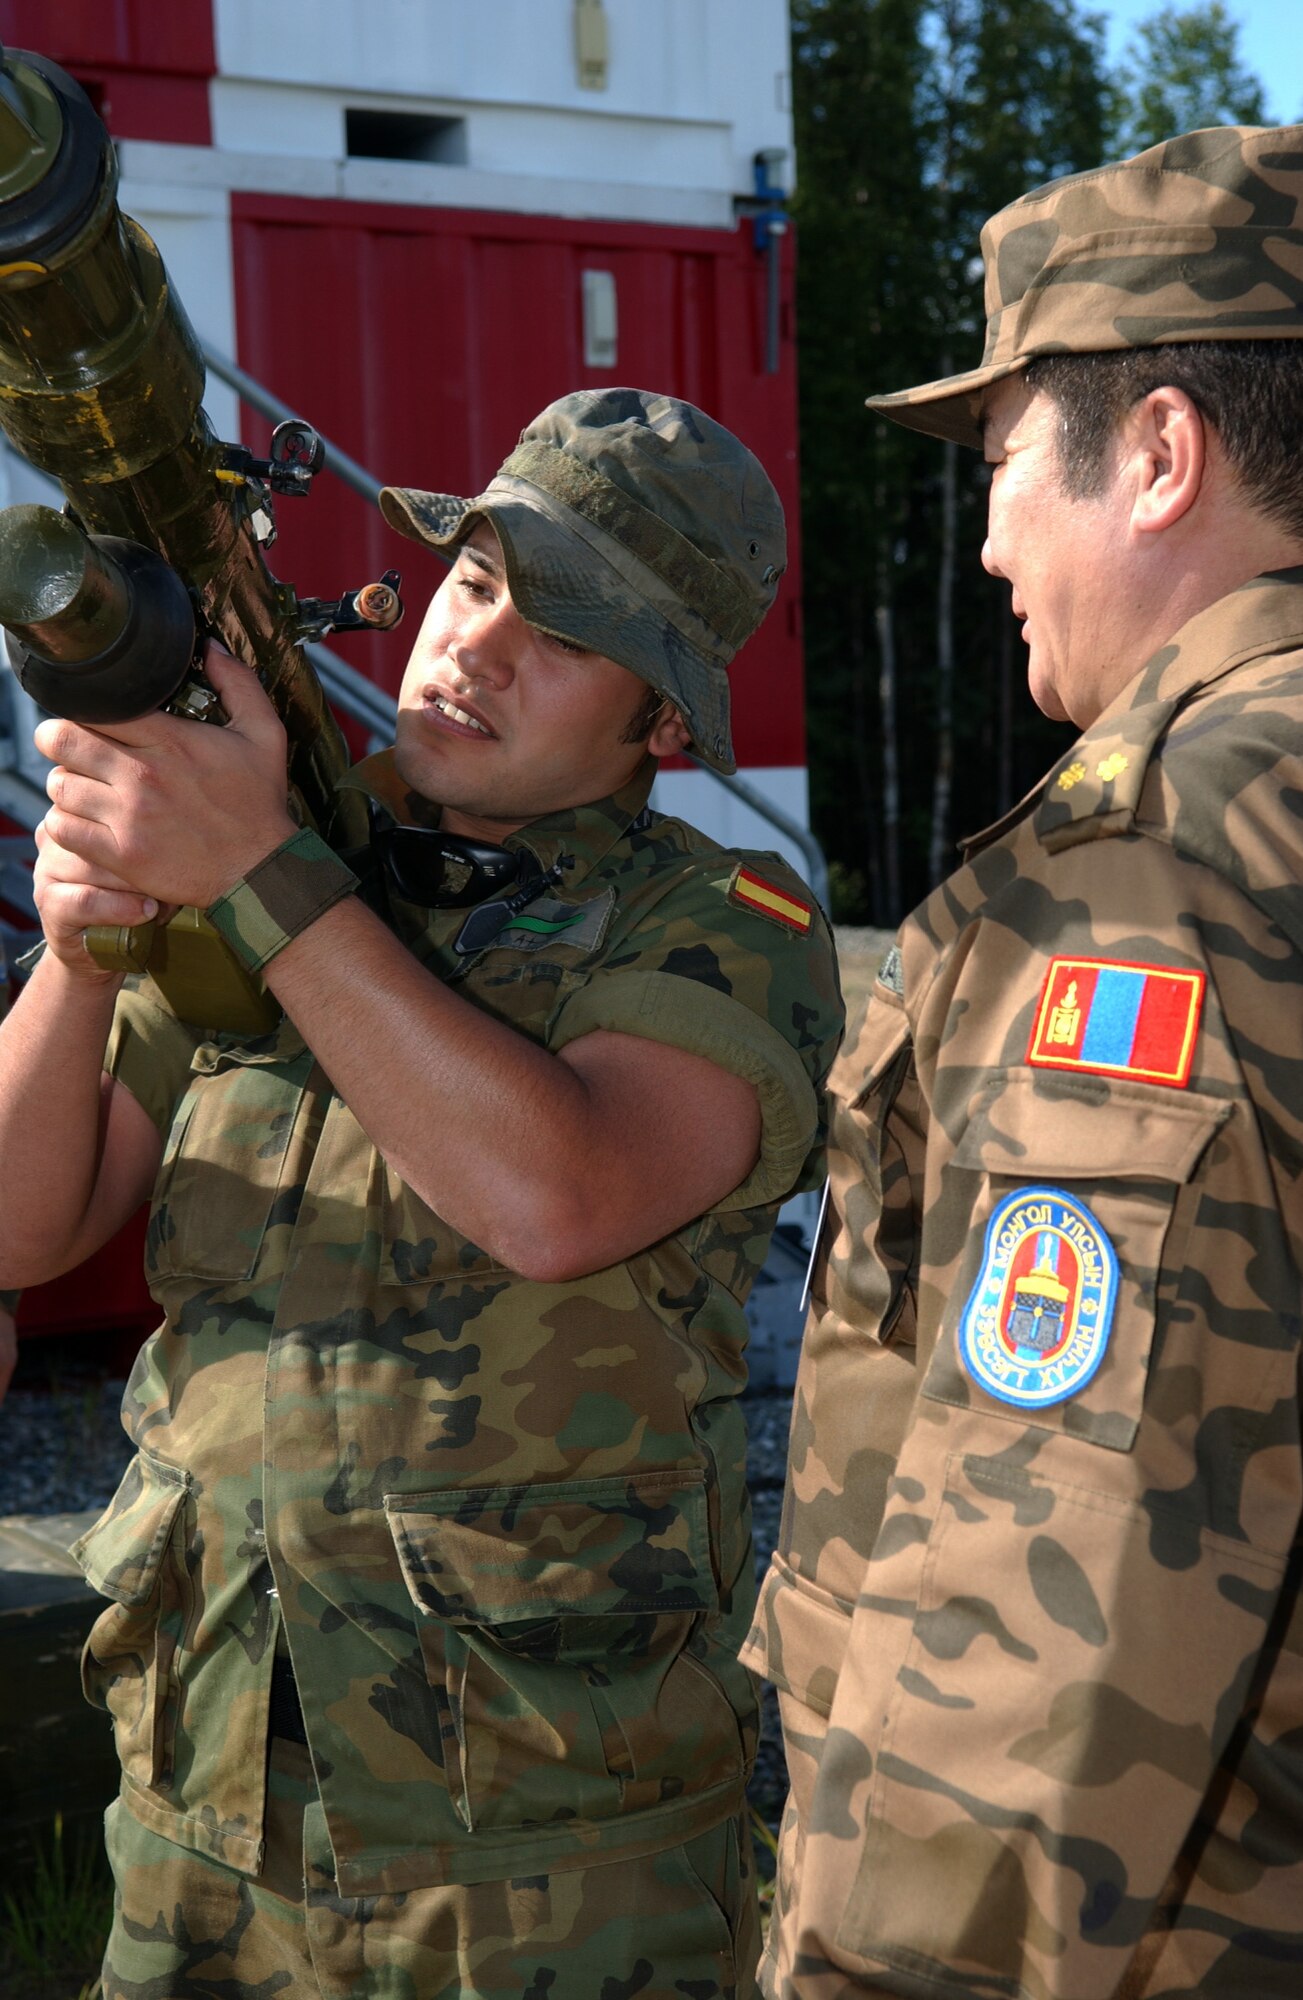 EIELSON AIR FORCE BASE, Alaska -- Lt. Col. Jigjid Batsukh (Right), Mongolian Air Defense Force, instructs Airman Basic Hugo Lesta (Left), Spanish Air Force, the operation of an SA-7 Man-portable air-defense systems (surface to air missile launcher) on the Pacific Alaskan Range Complex on July 16 during Red Flag-Alaska 07-3. The PARC provides 67,000 square miles of airspace, one conventional bombing range and two tactical bombing ranges containing more than 400 different types of targets and more than 30 threat simulators which allows them to exchange tactics, techniques, and procedures and improve interoperability. (U.S. Air Force Photo by Airman 1st Class Jonathan Snyder)